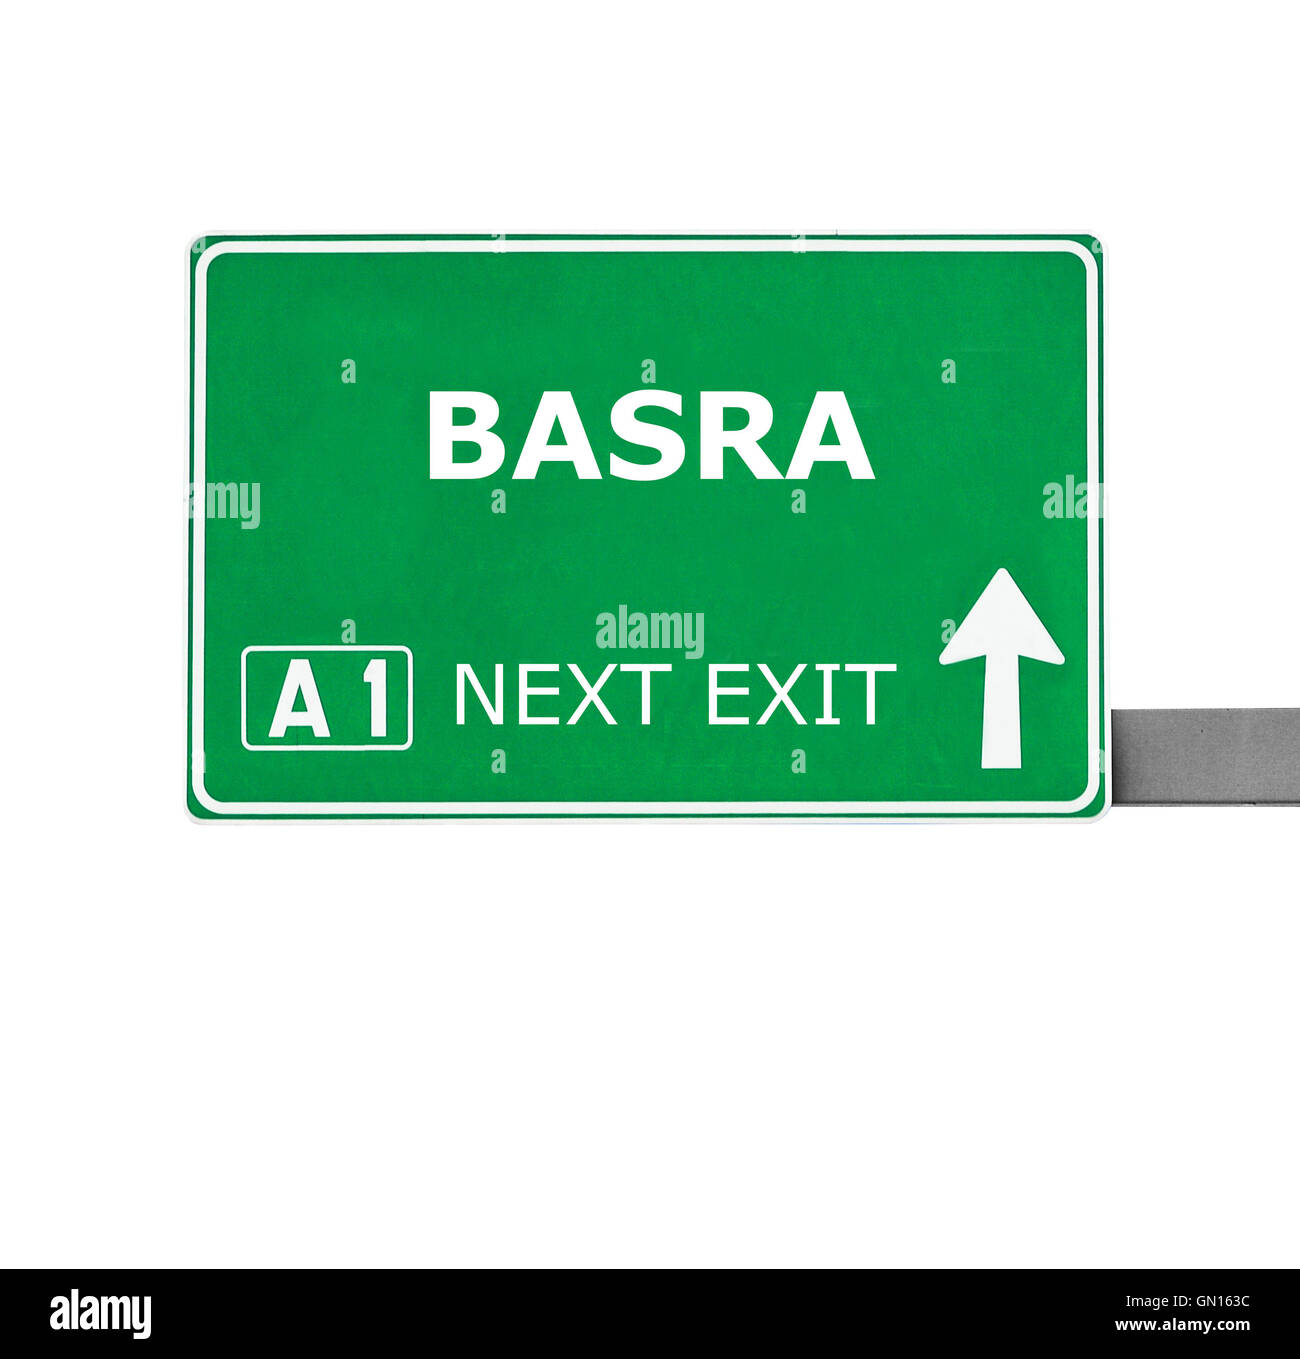 BASRA road sign isolated on white Stock Photo